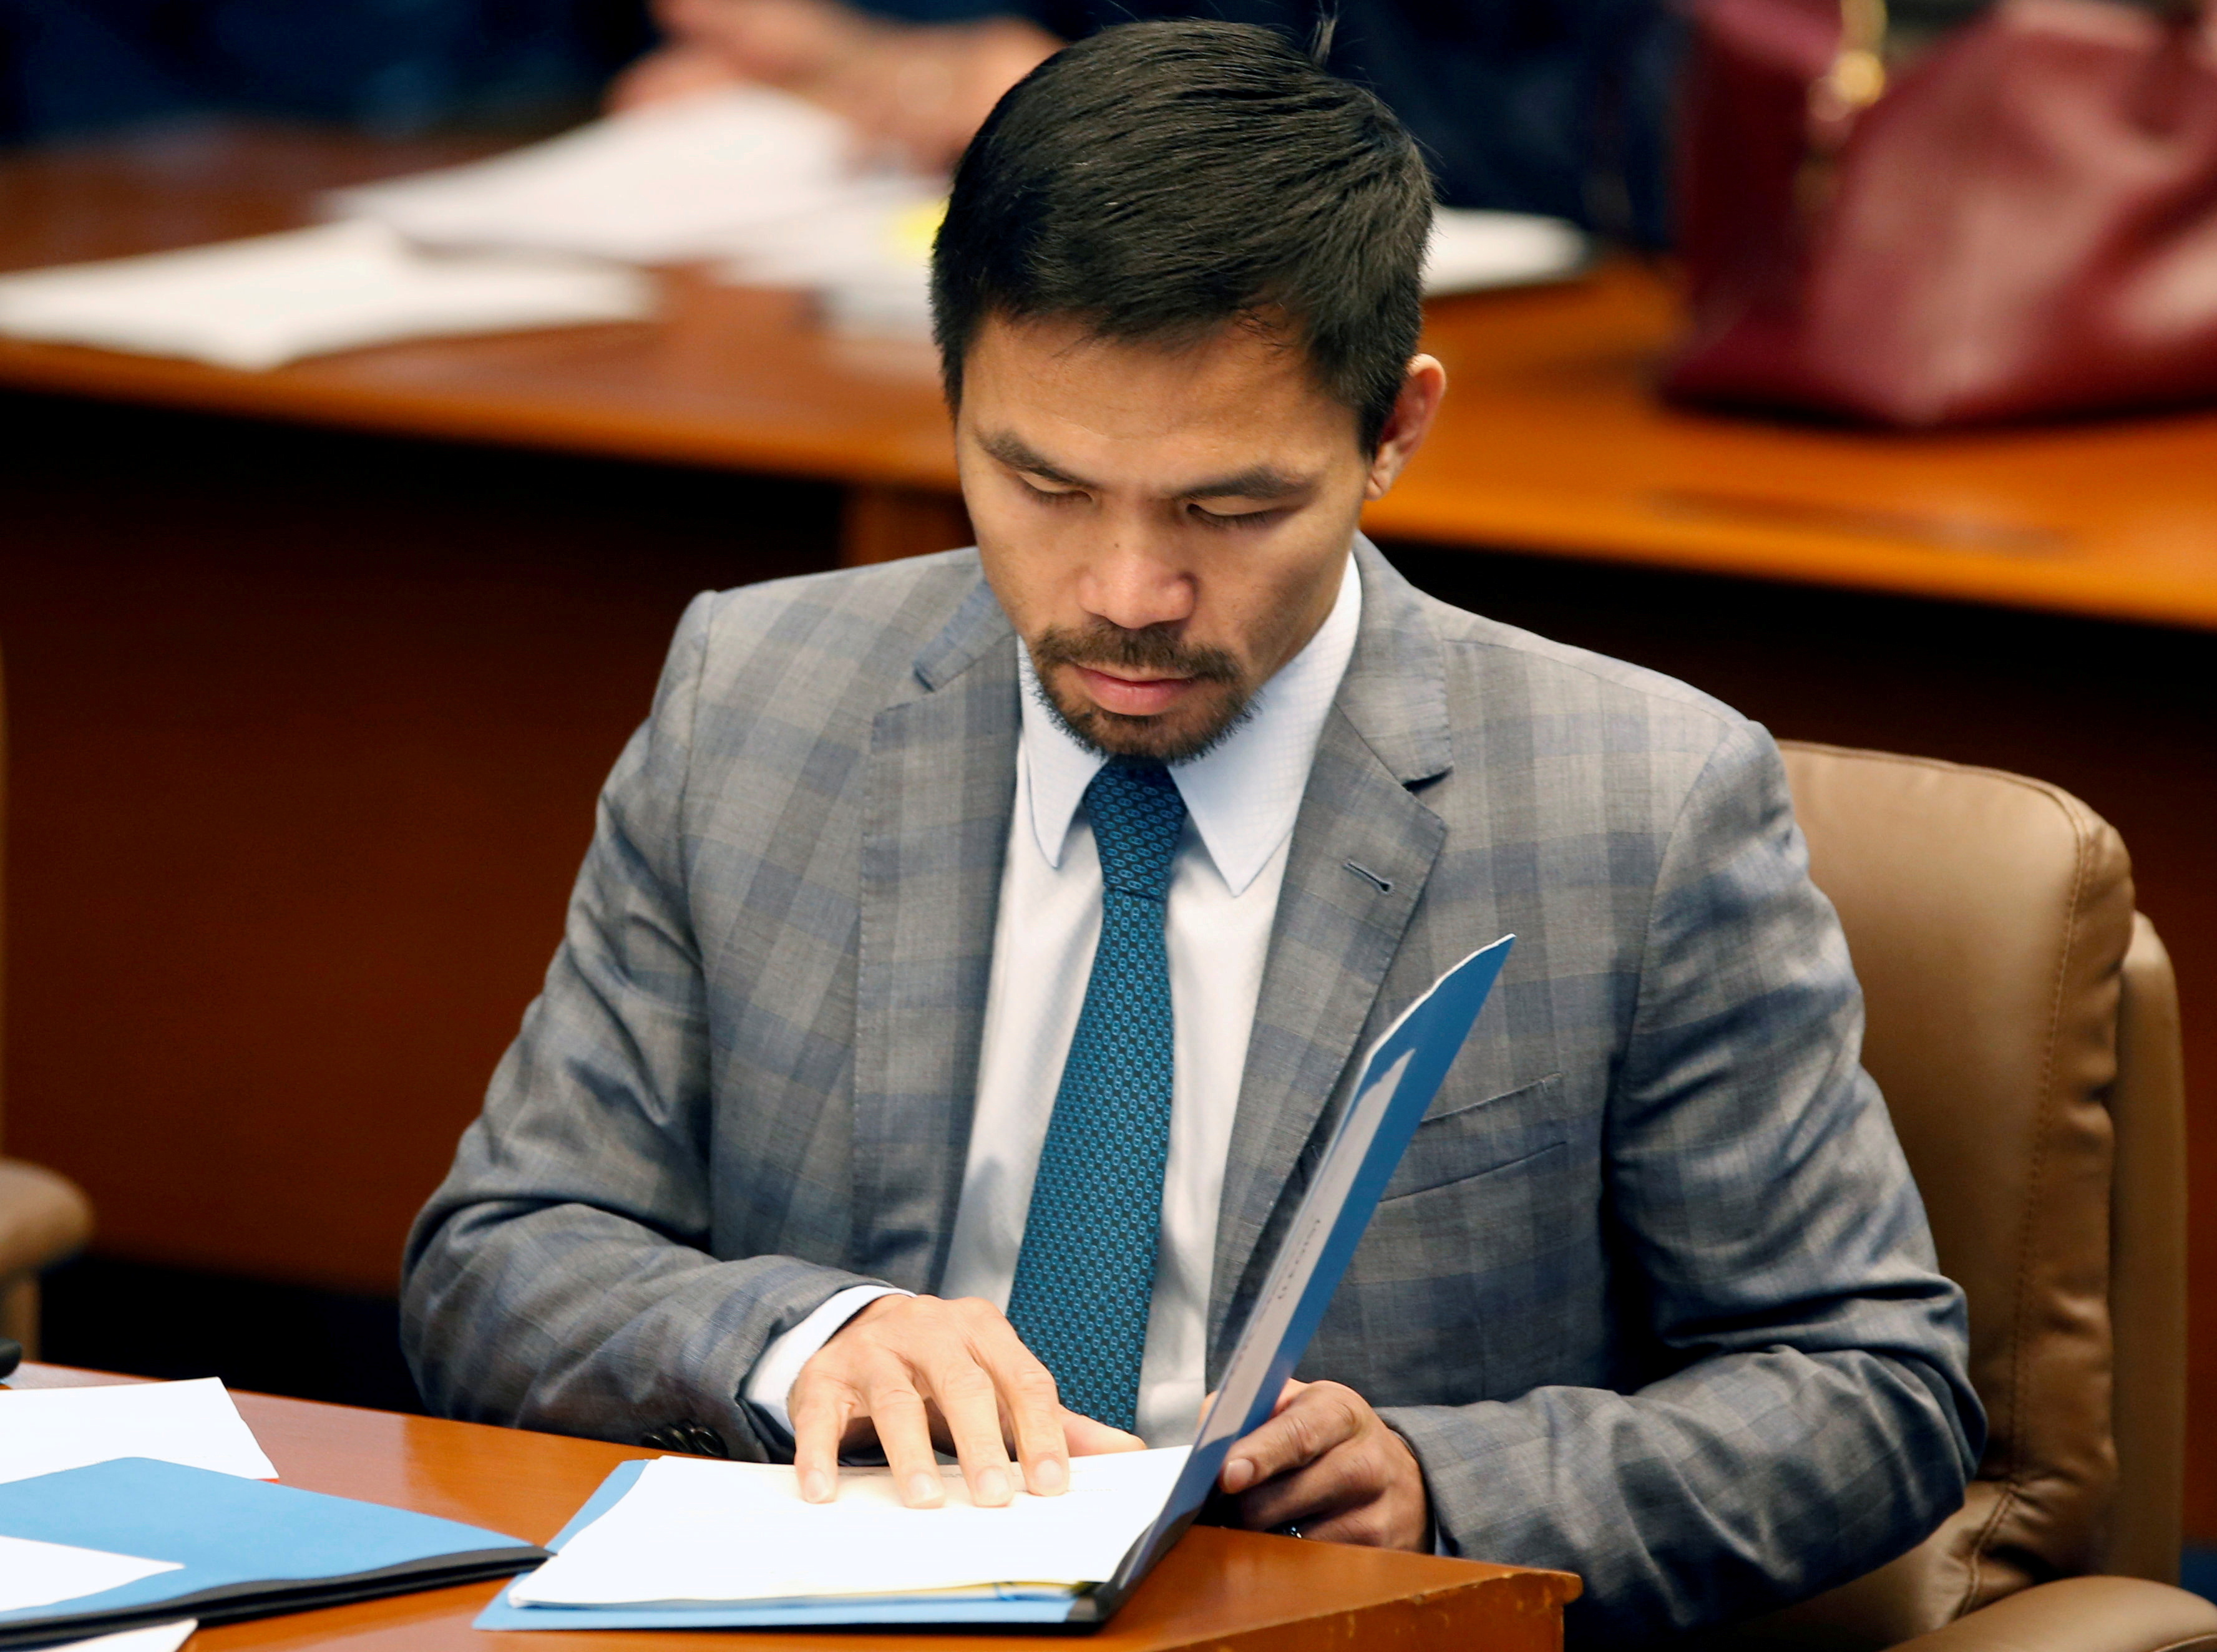 Philippine Senator and boxing champion Manny Pacquiao reads his briefing materials as he prepares for the Senate session in Pasay city, Metro Manila